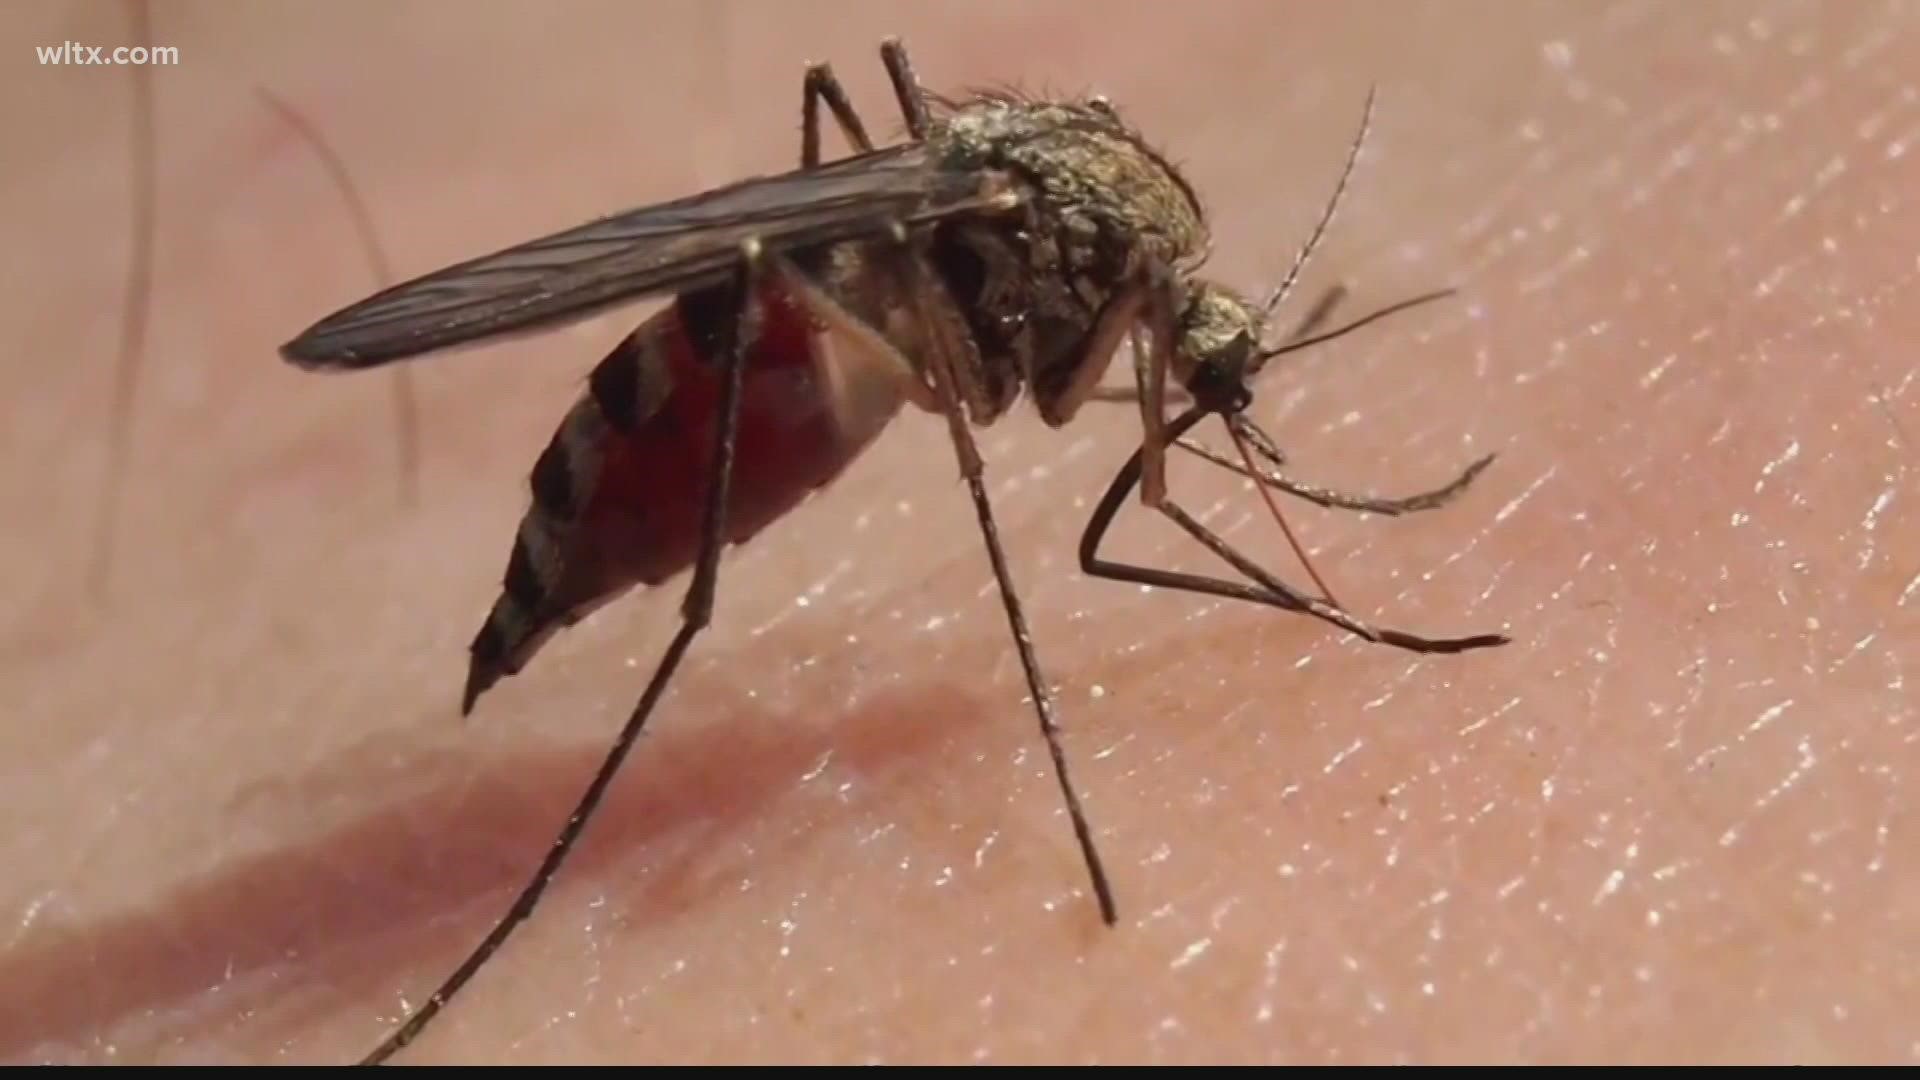 Residents are urged to protect themselves as the City of Columbia continues to spray for mosquitos.